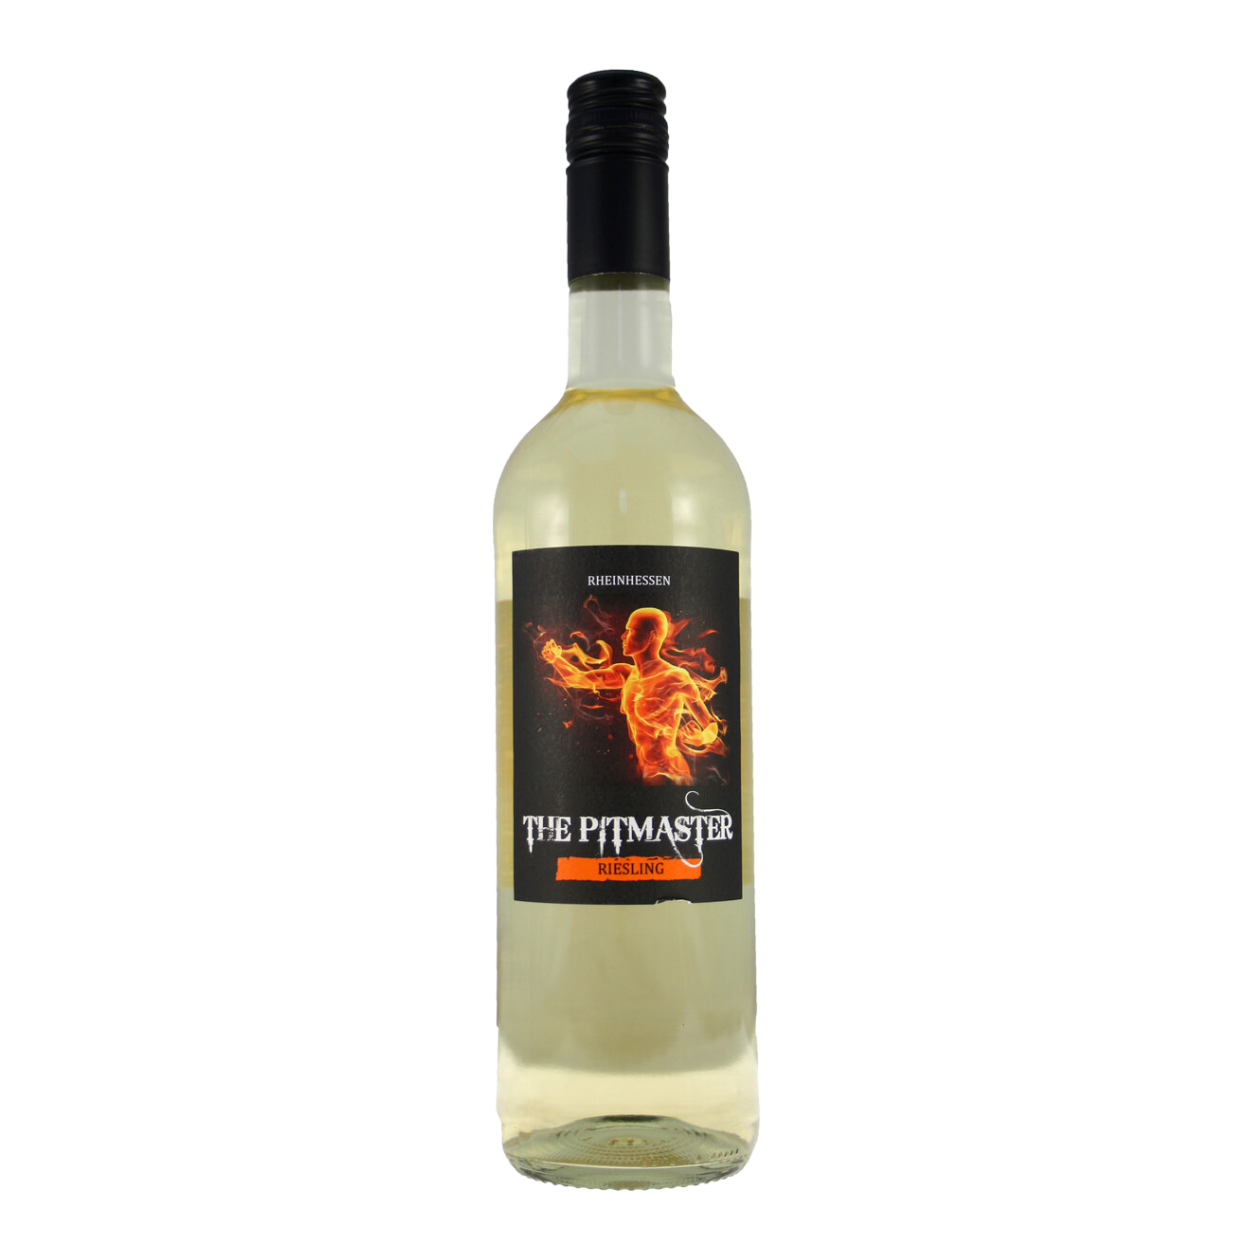 The Pitmaster Riesling